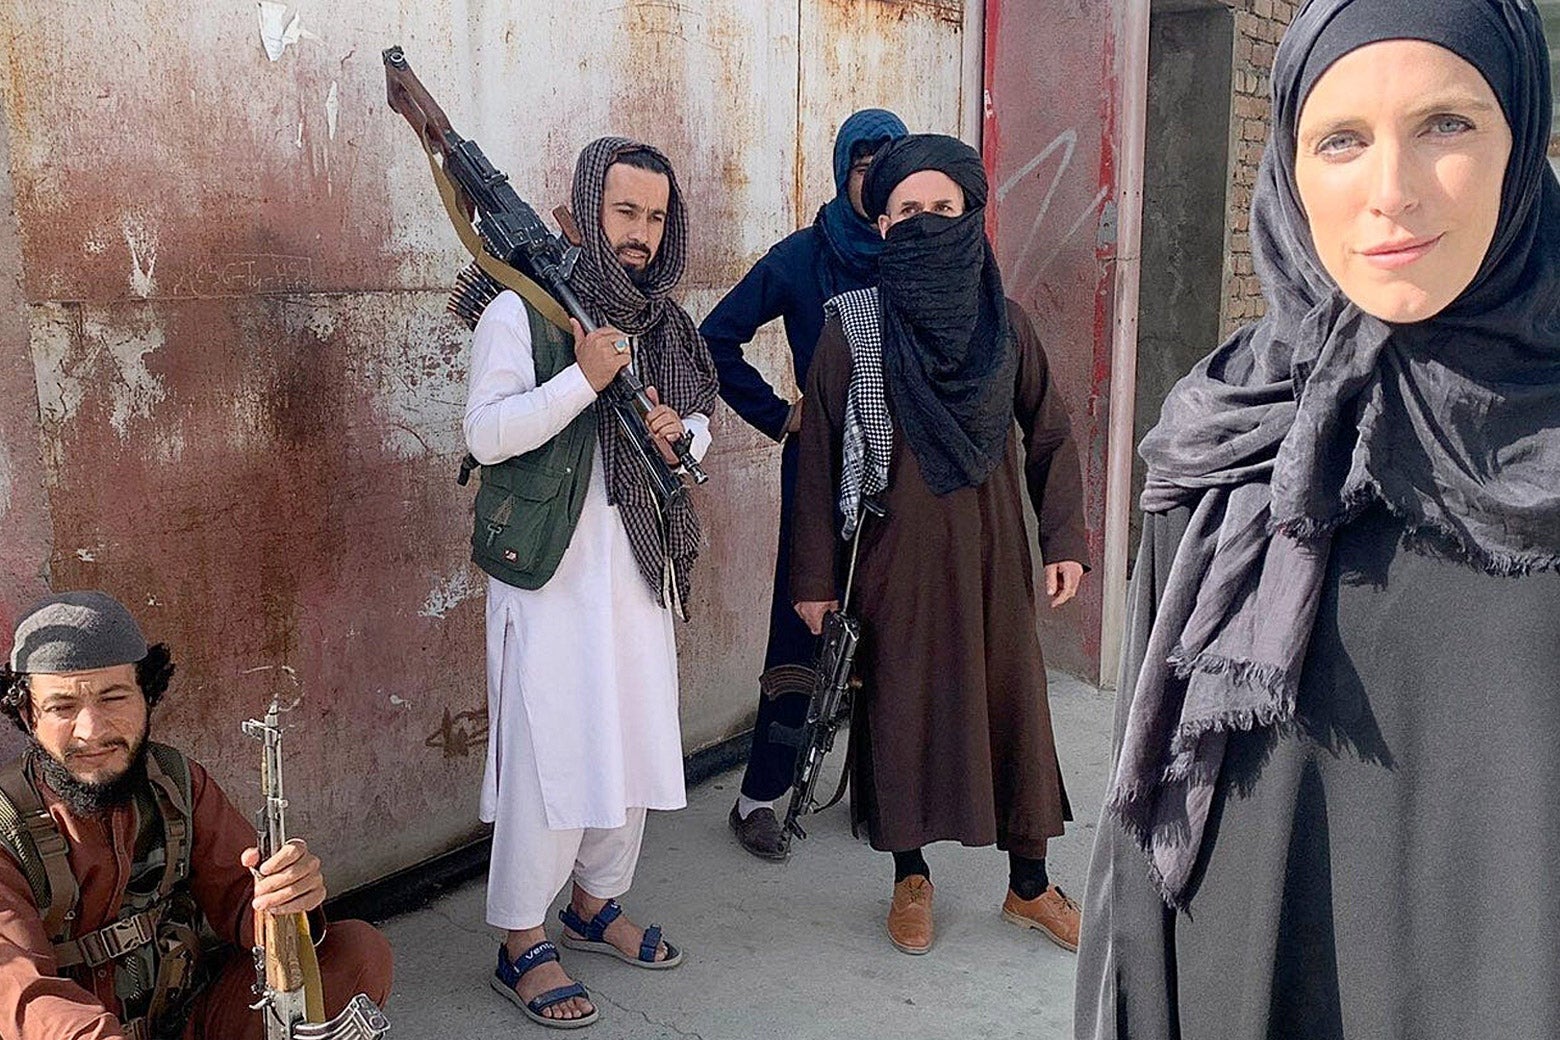 Ward wearing a black abaya and headscarf, Clarissa Ward stands beside four Taliban fighters with guns outside.